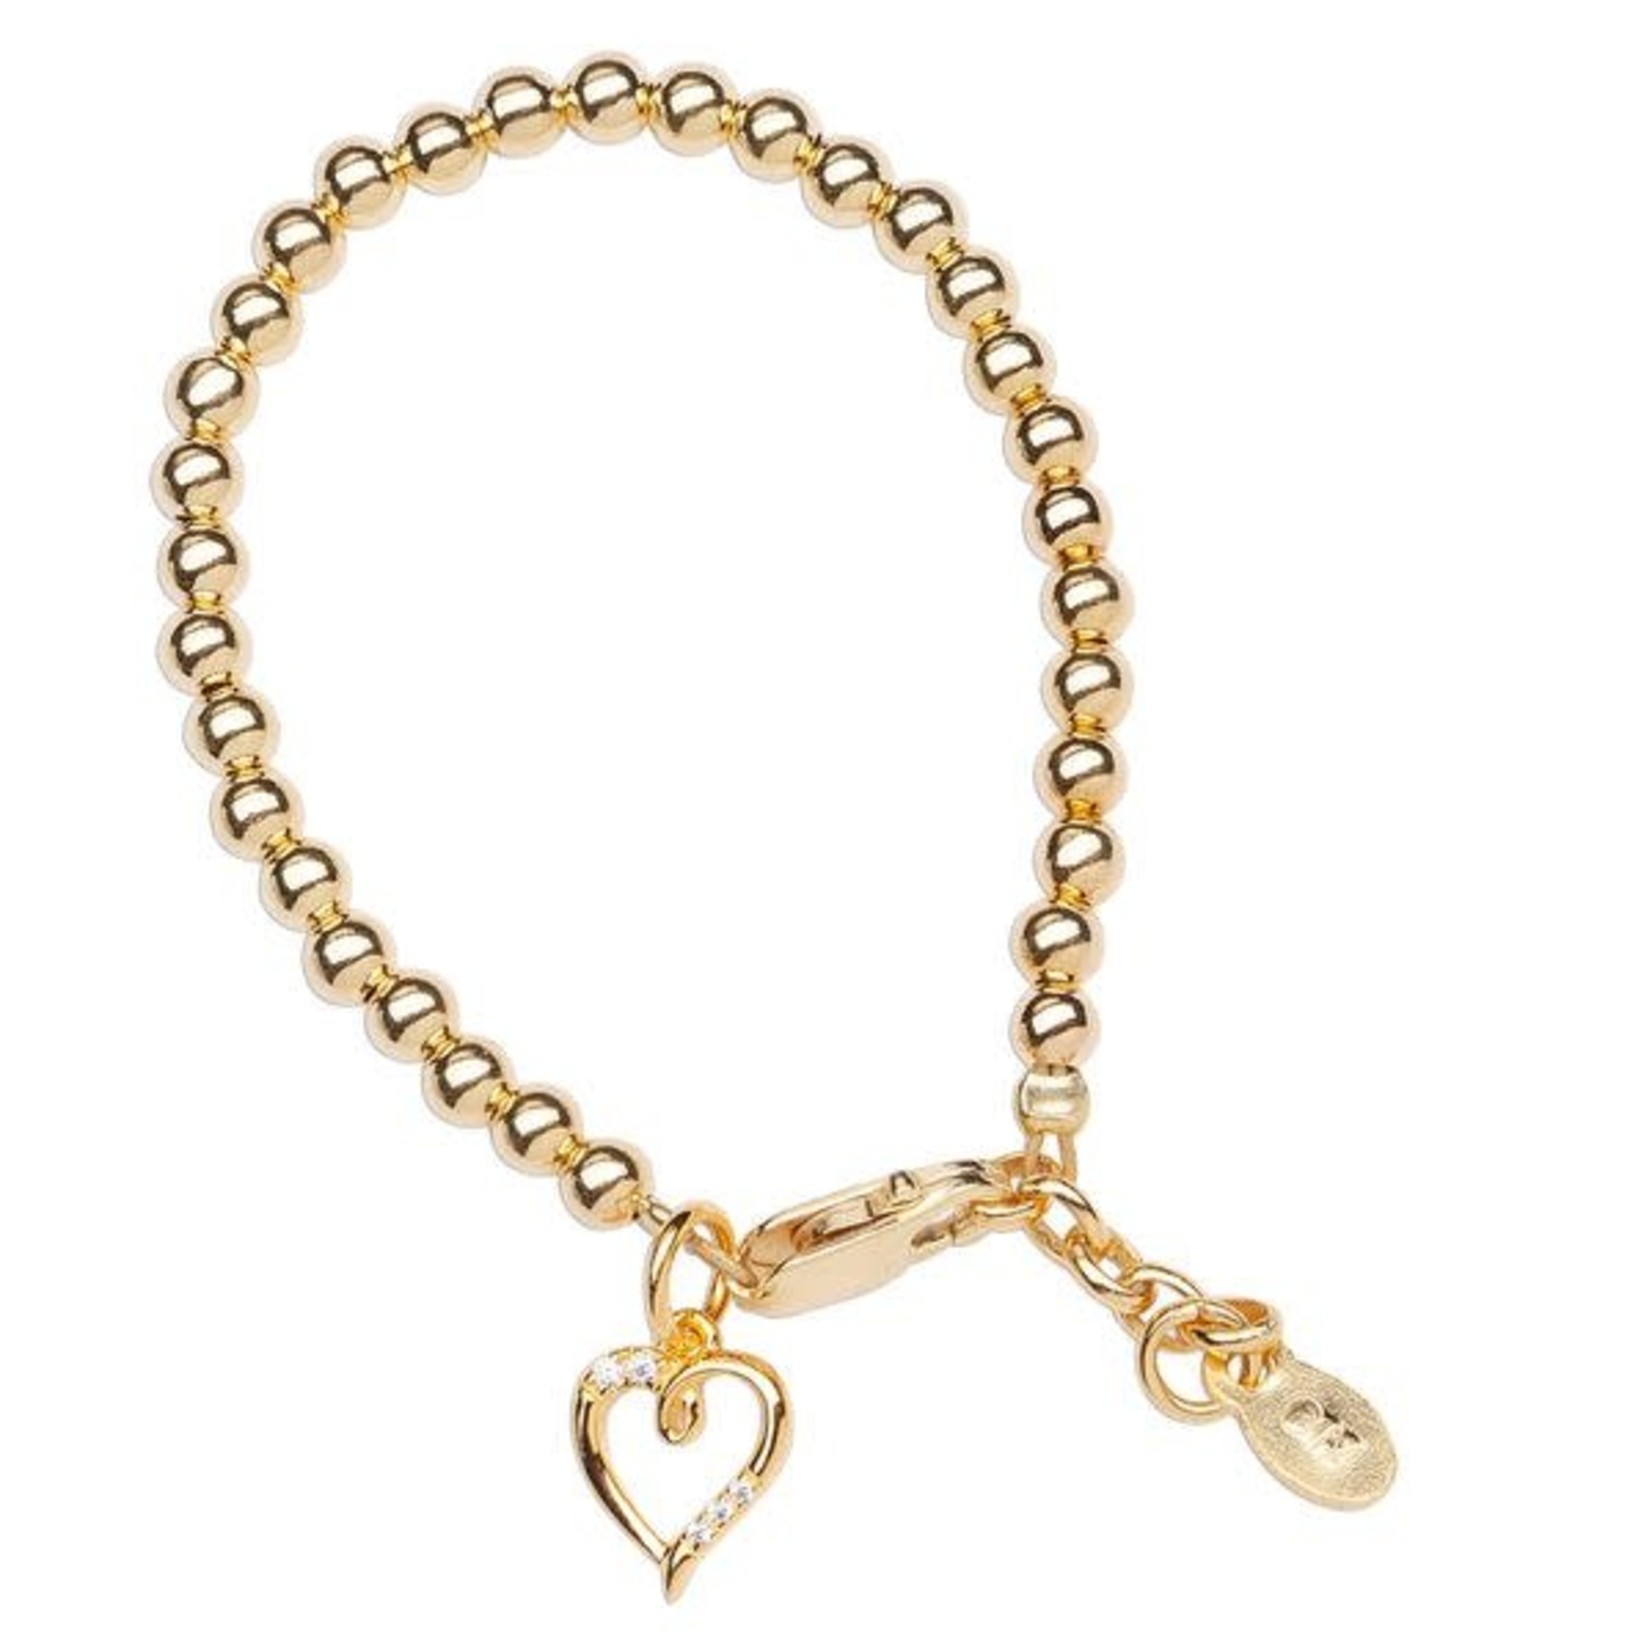 Cherished Moments Aria - (M 1-5y) 14K Gold Plated Bracelet with Heart